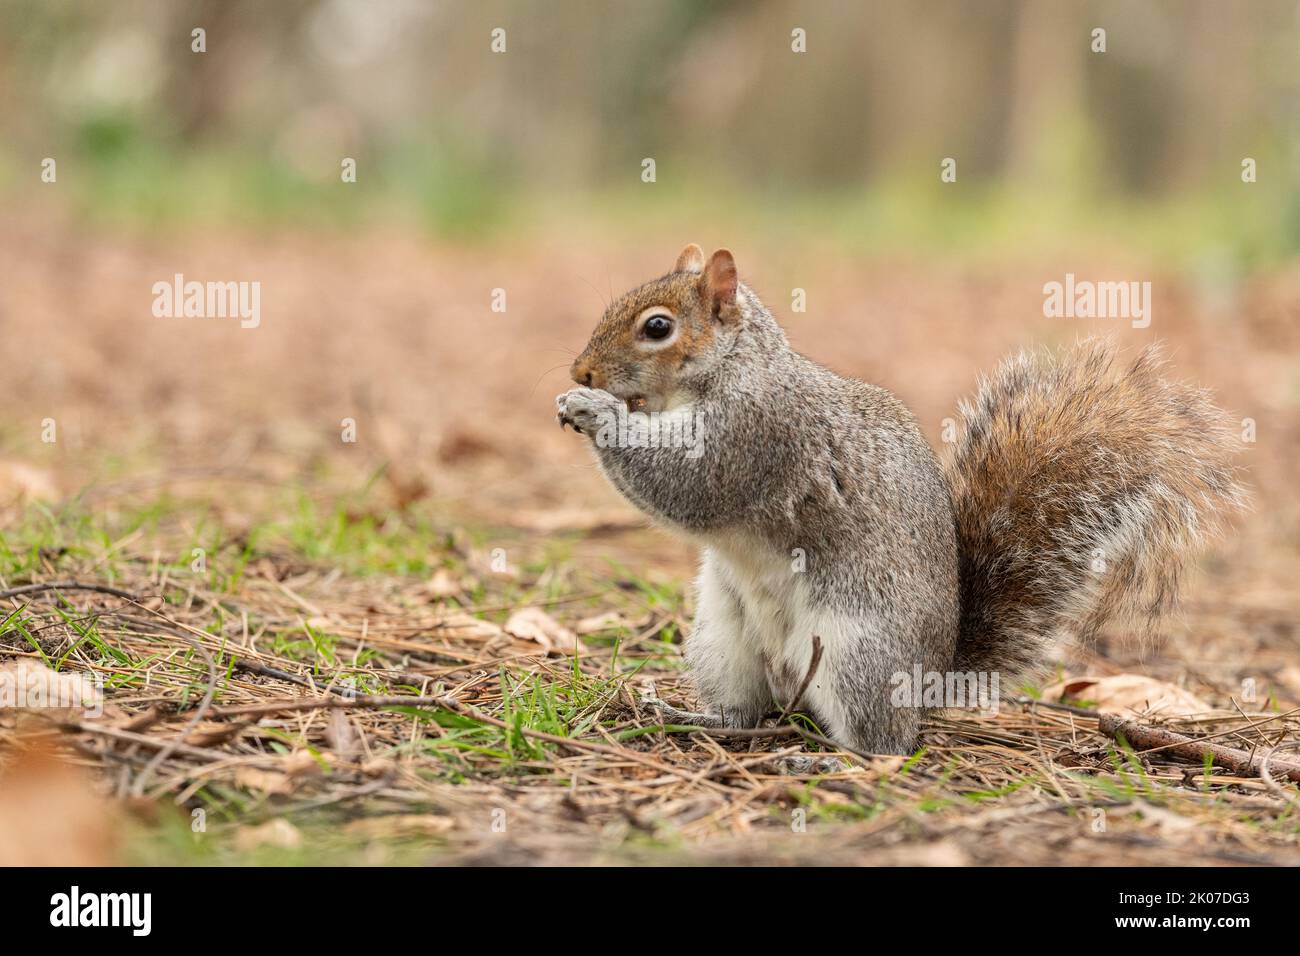 Close ups of a Grey Squirrel foraging on the ground in a park and eating peanuts Stock Photo